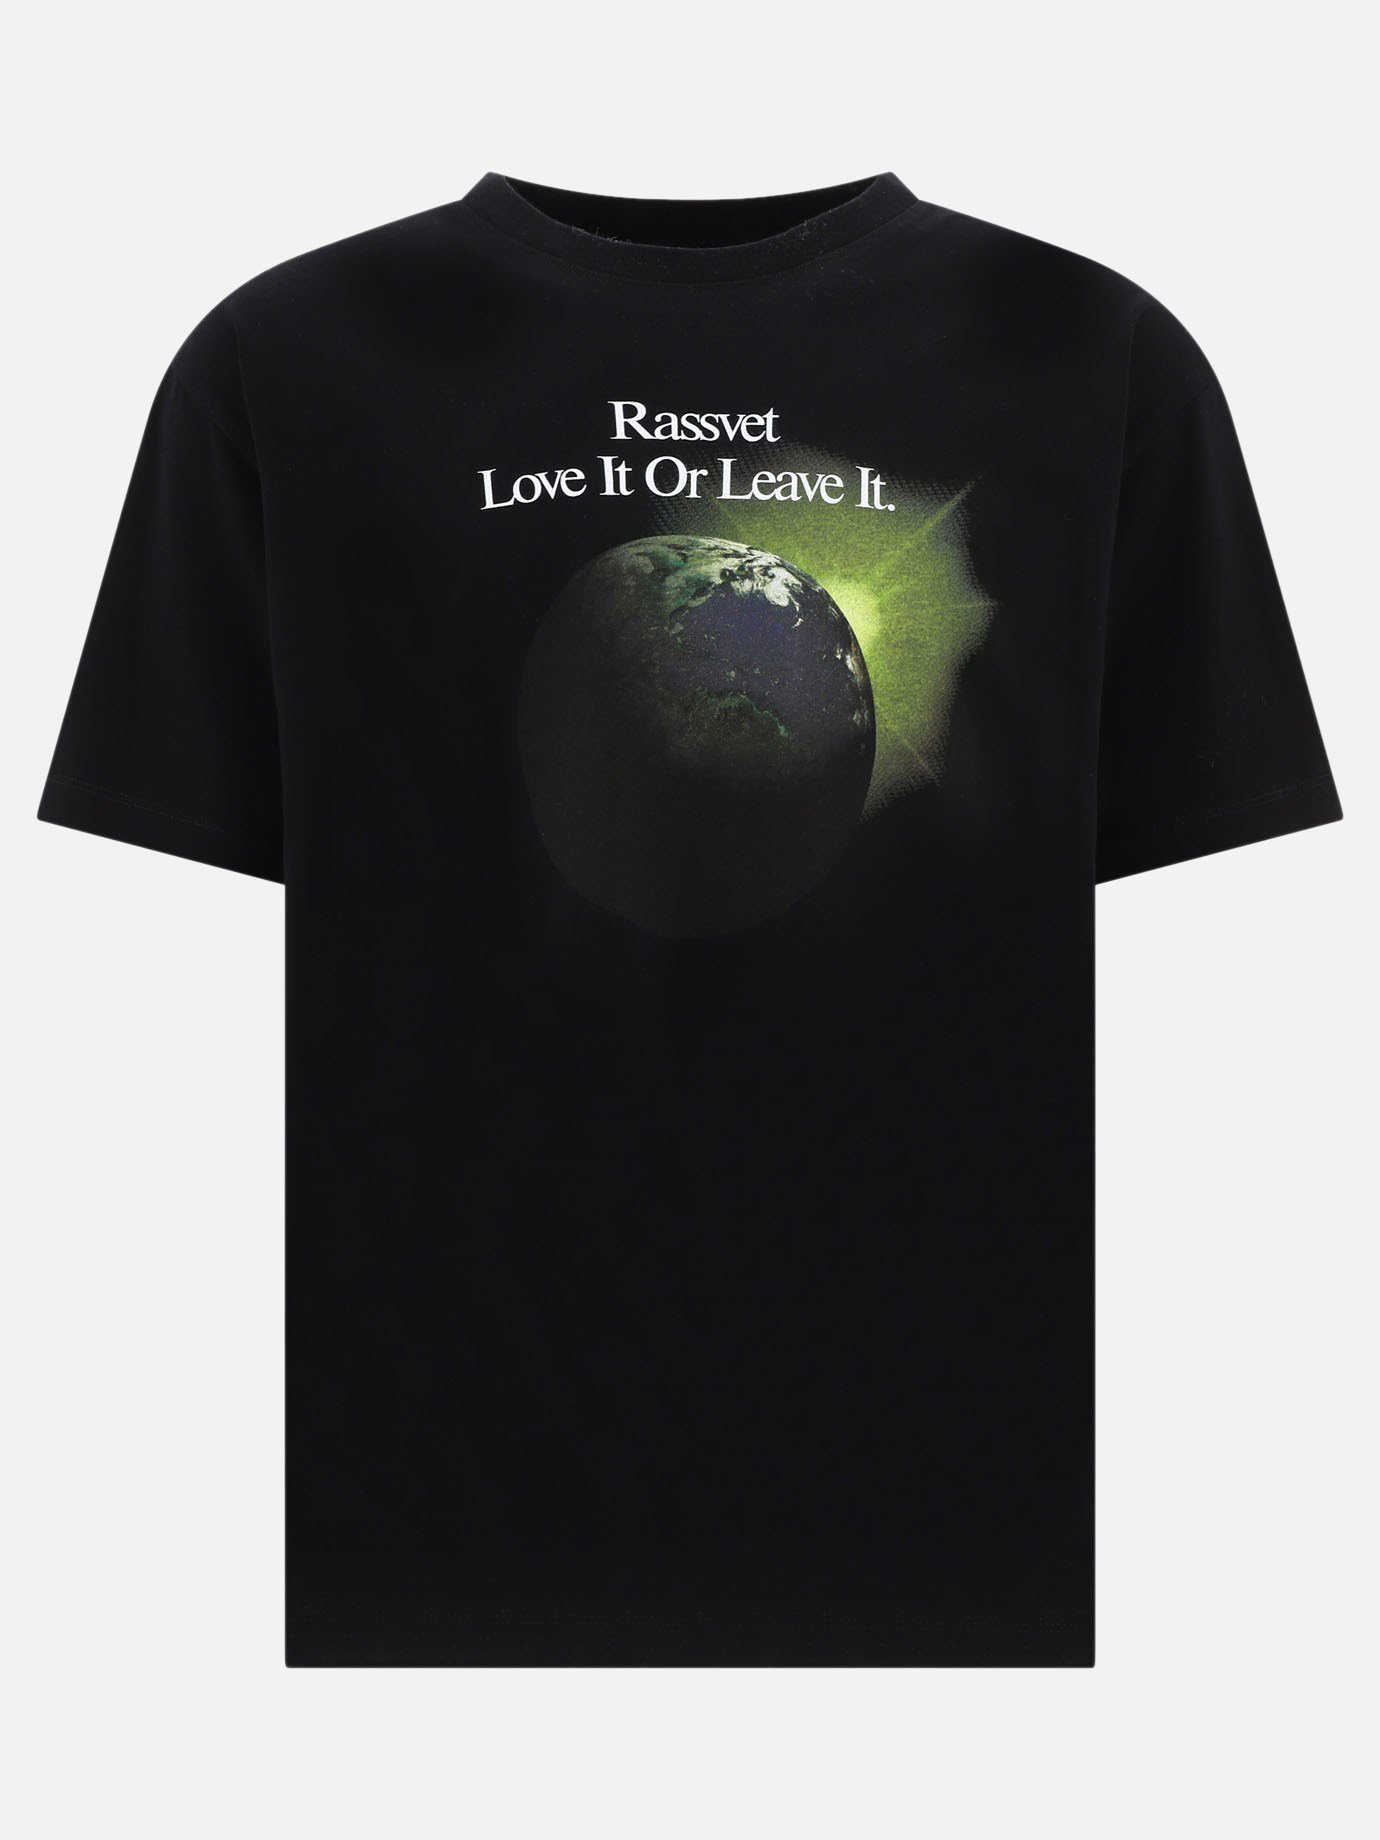  Love It Or Leave It  t-shirtby Paccbet - 3